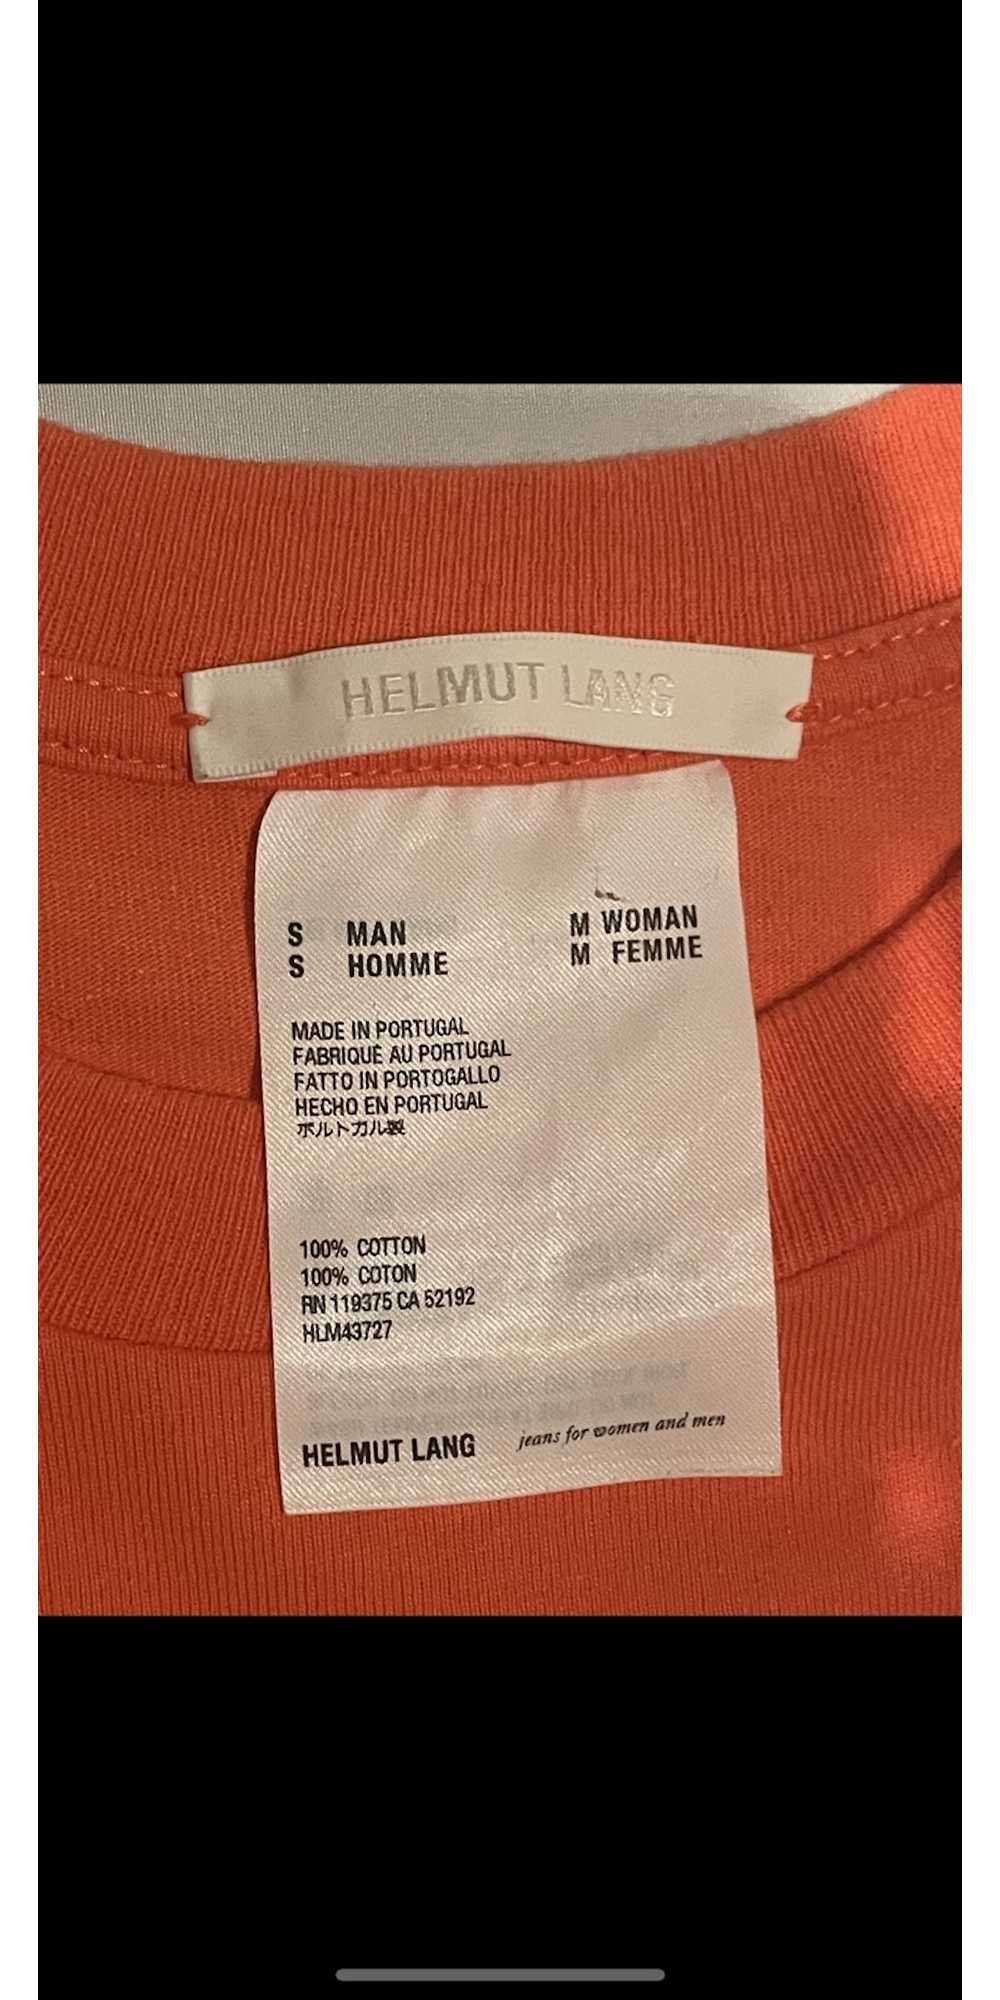 Helmut Lang Think of a No. Divide it by 2 Tee - image 5